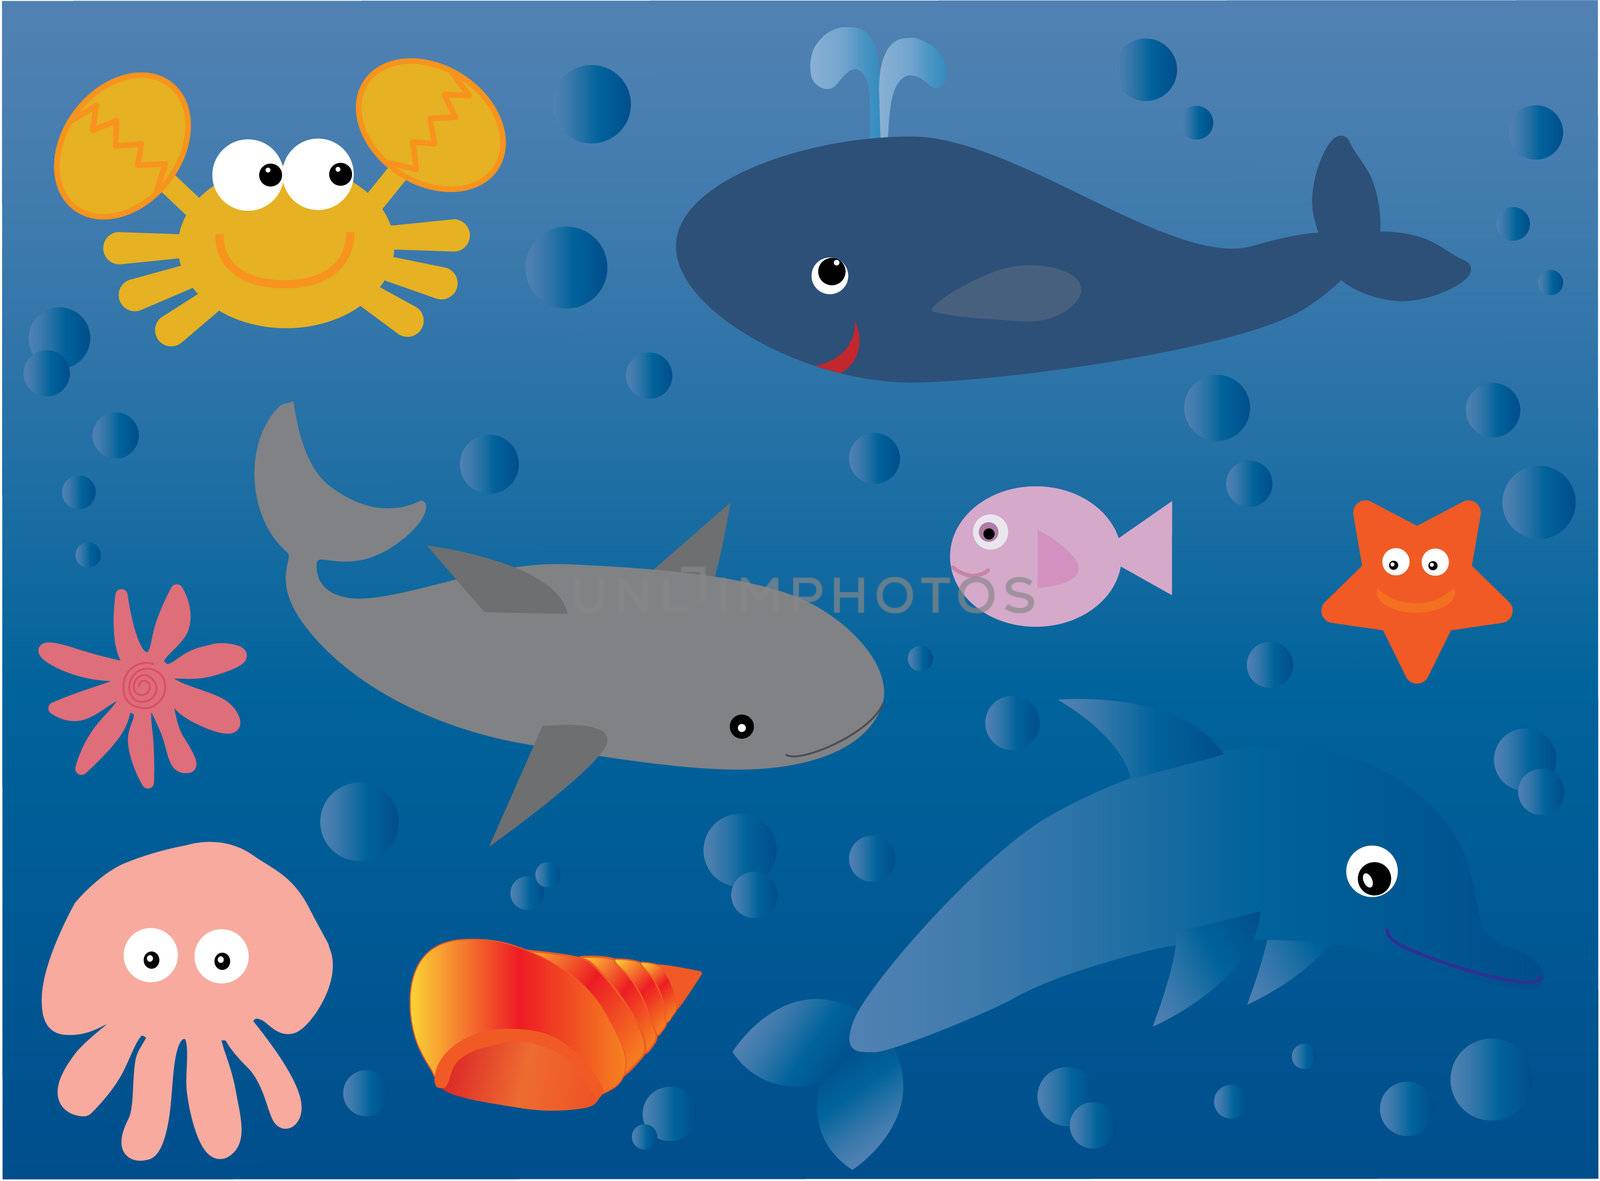 Vector illustration of a collection of marine life in a cute style suitable for children